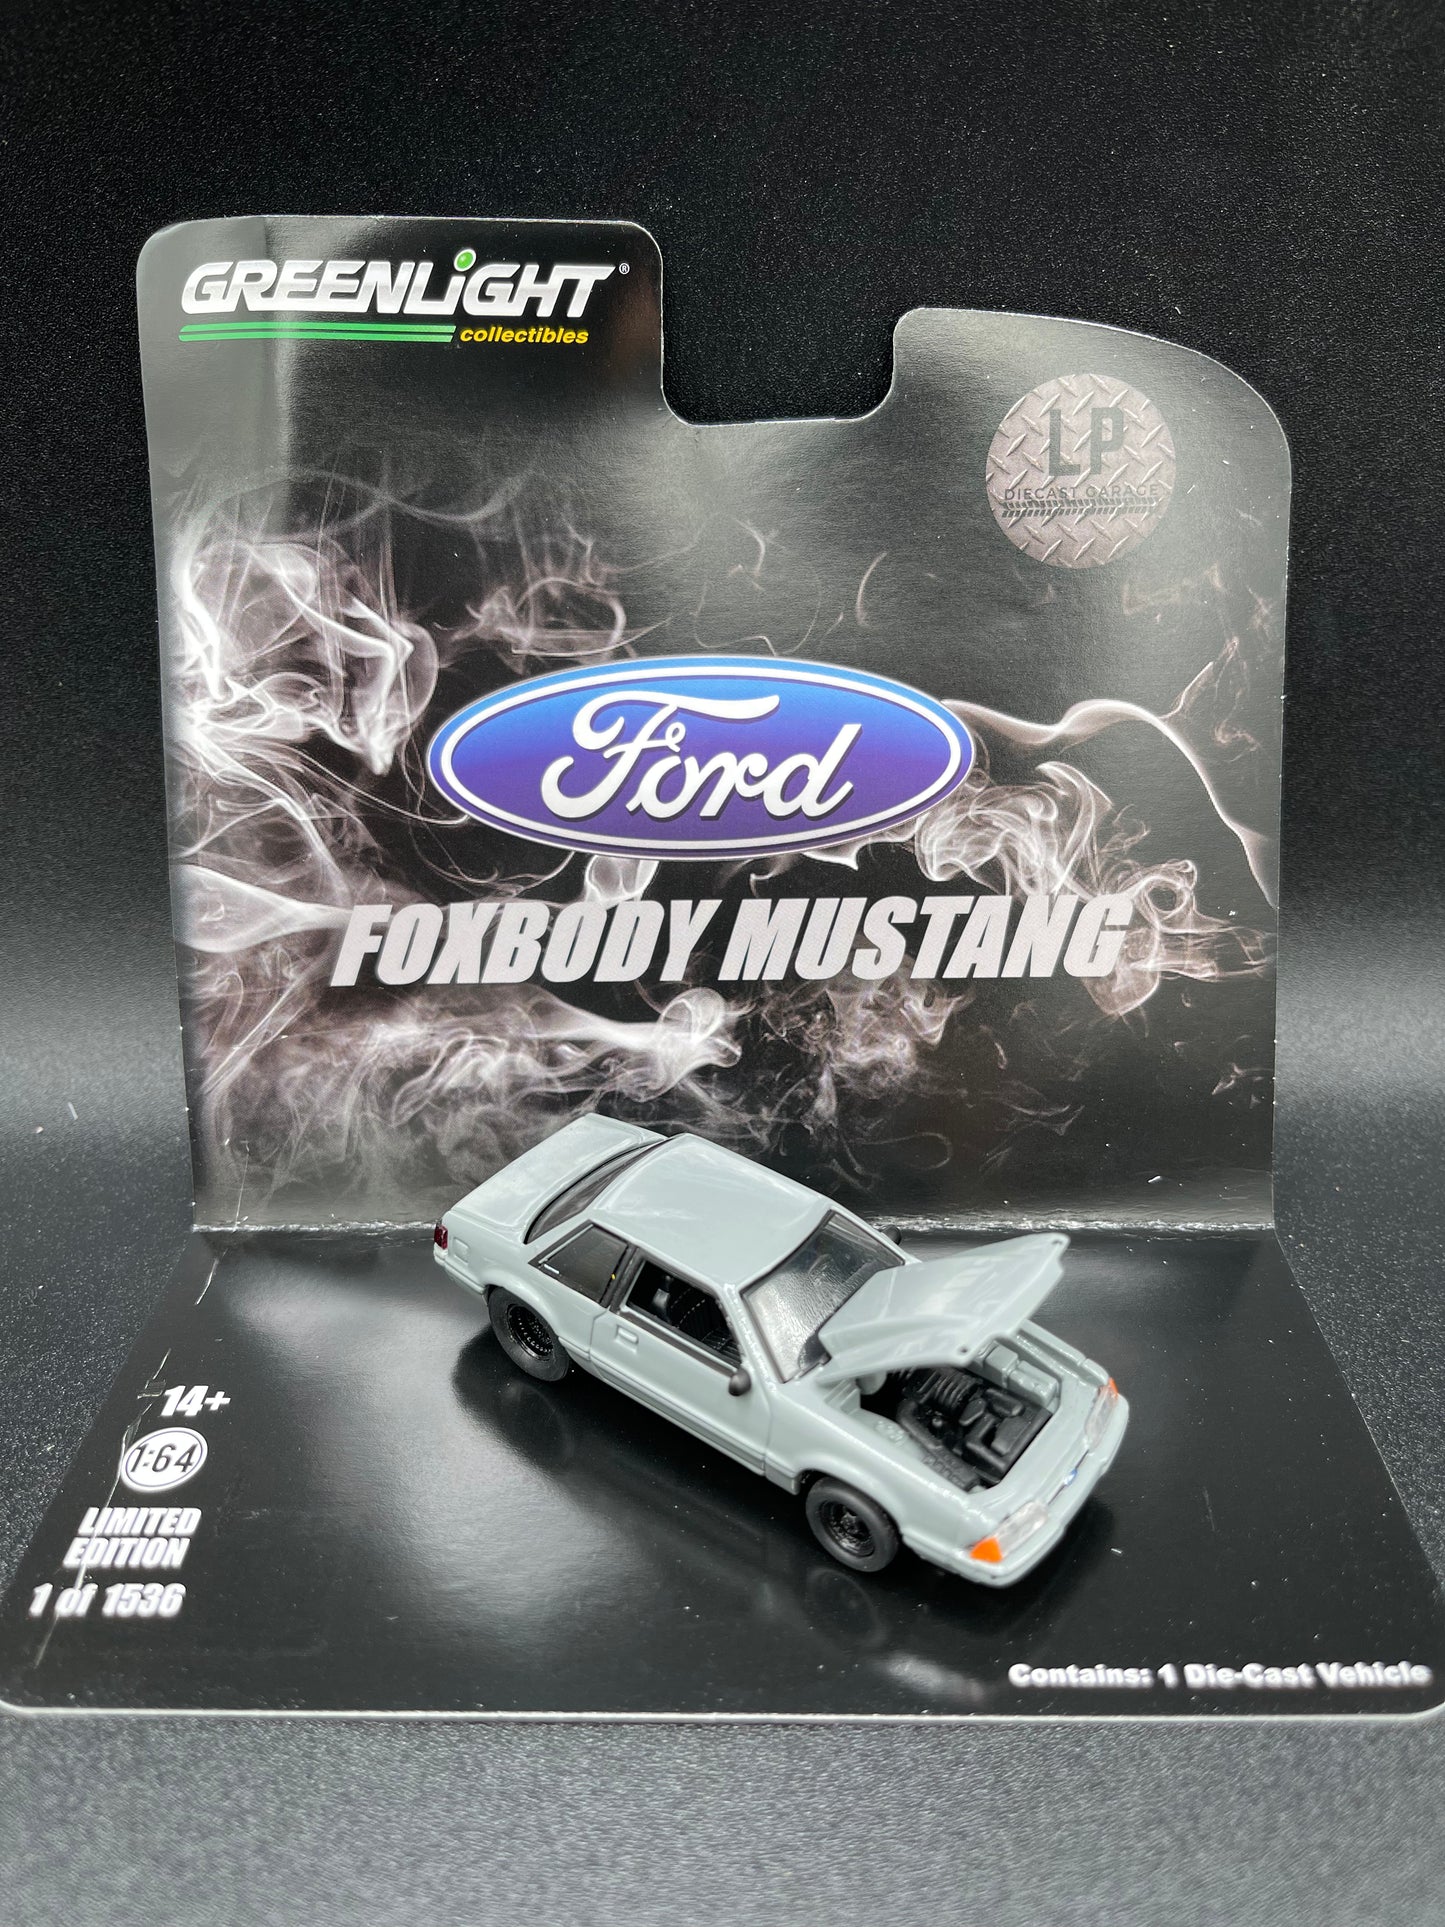 GREENLIGHT 1993 Ford Mustang 5.0 LX Coupe Destroyer Gray Drag LP Diecast Garage Exclusive Release 1:64 Diecast Promo